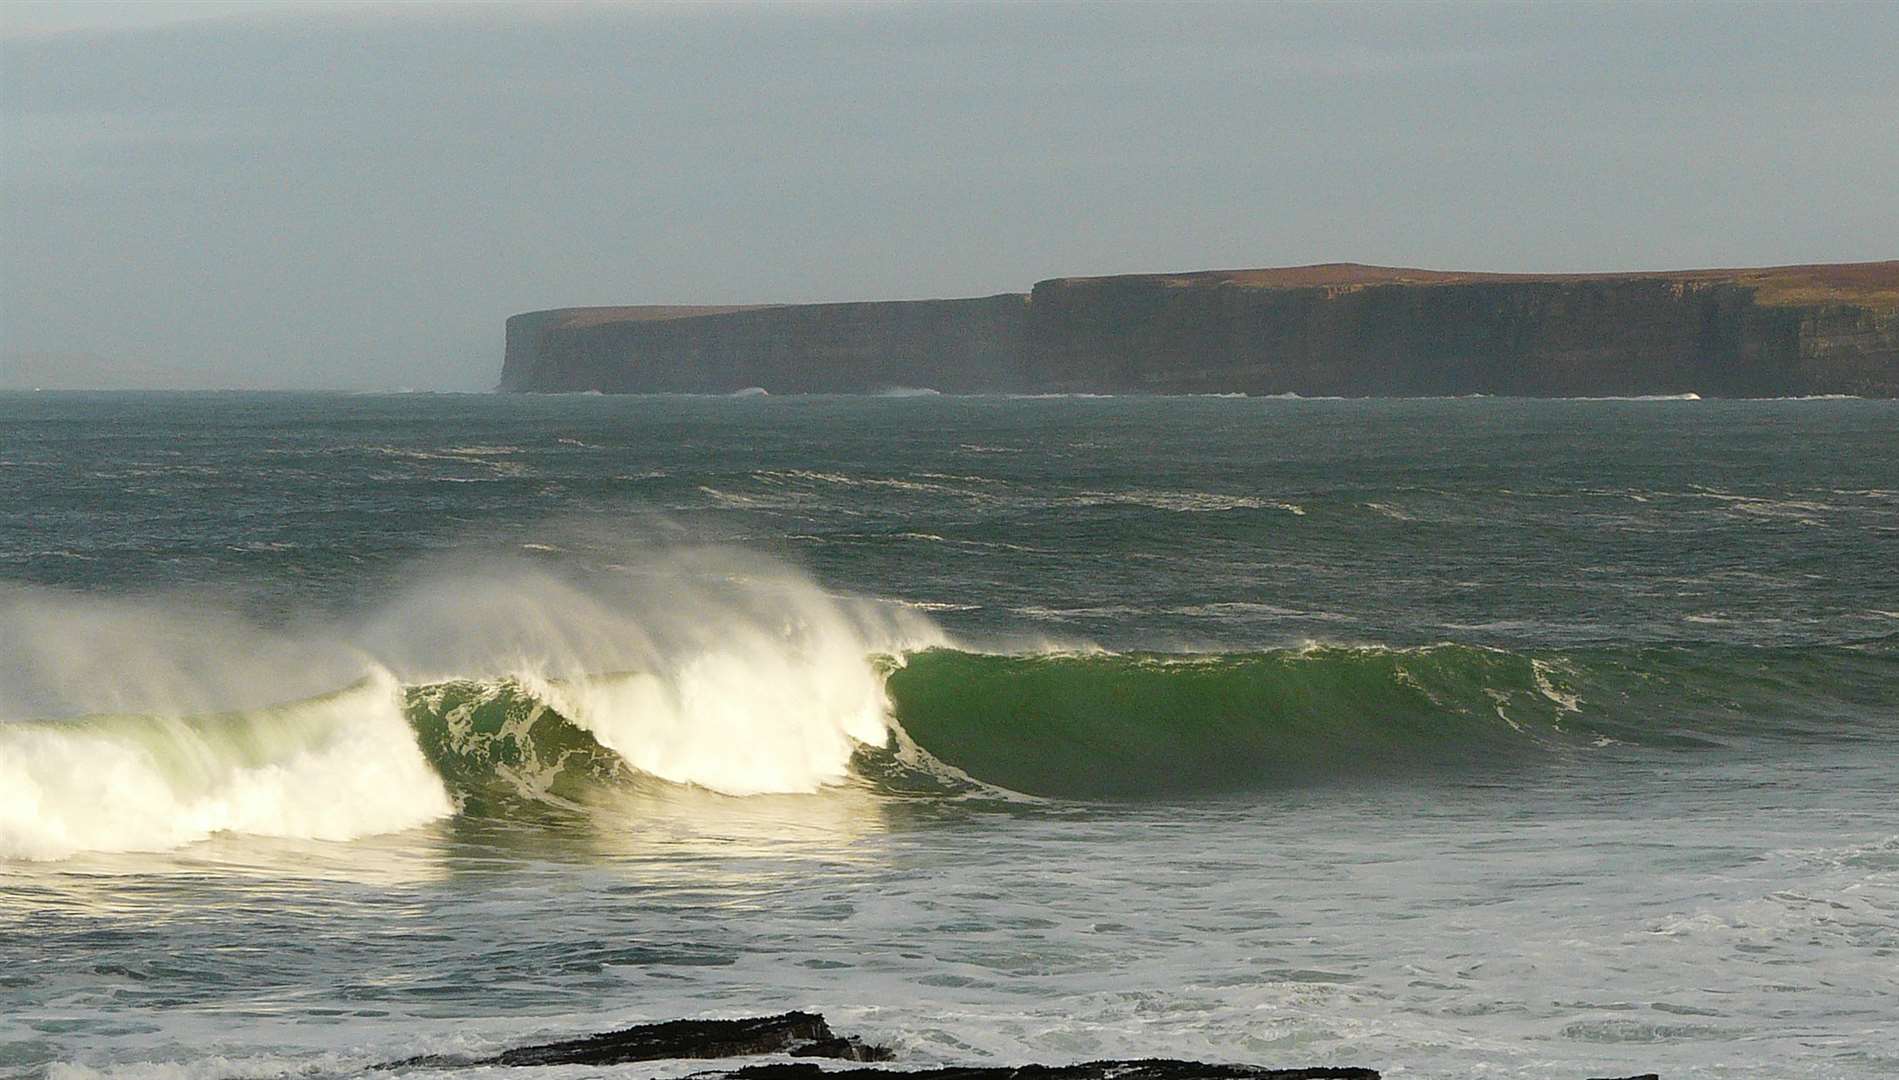 The surfing championships took place at Thurso East. Picture: Alan Hendry